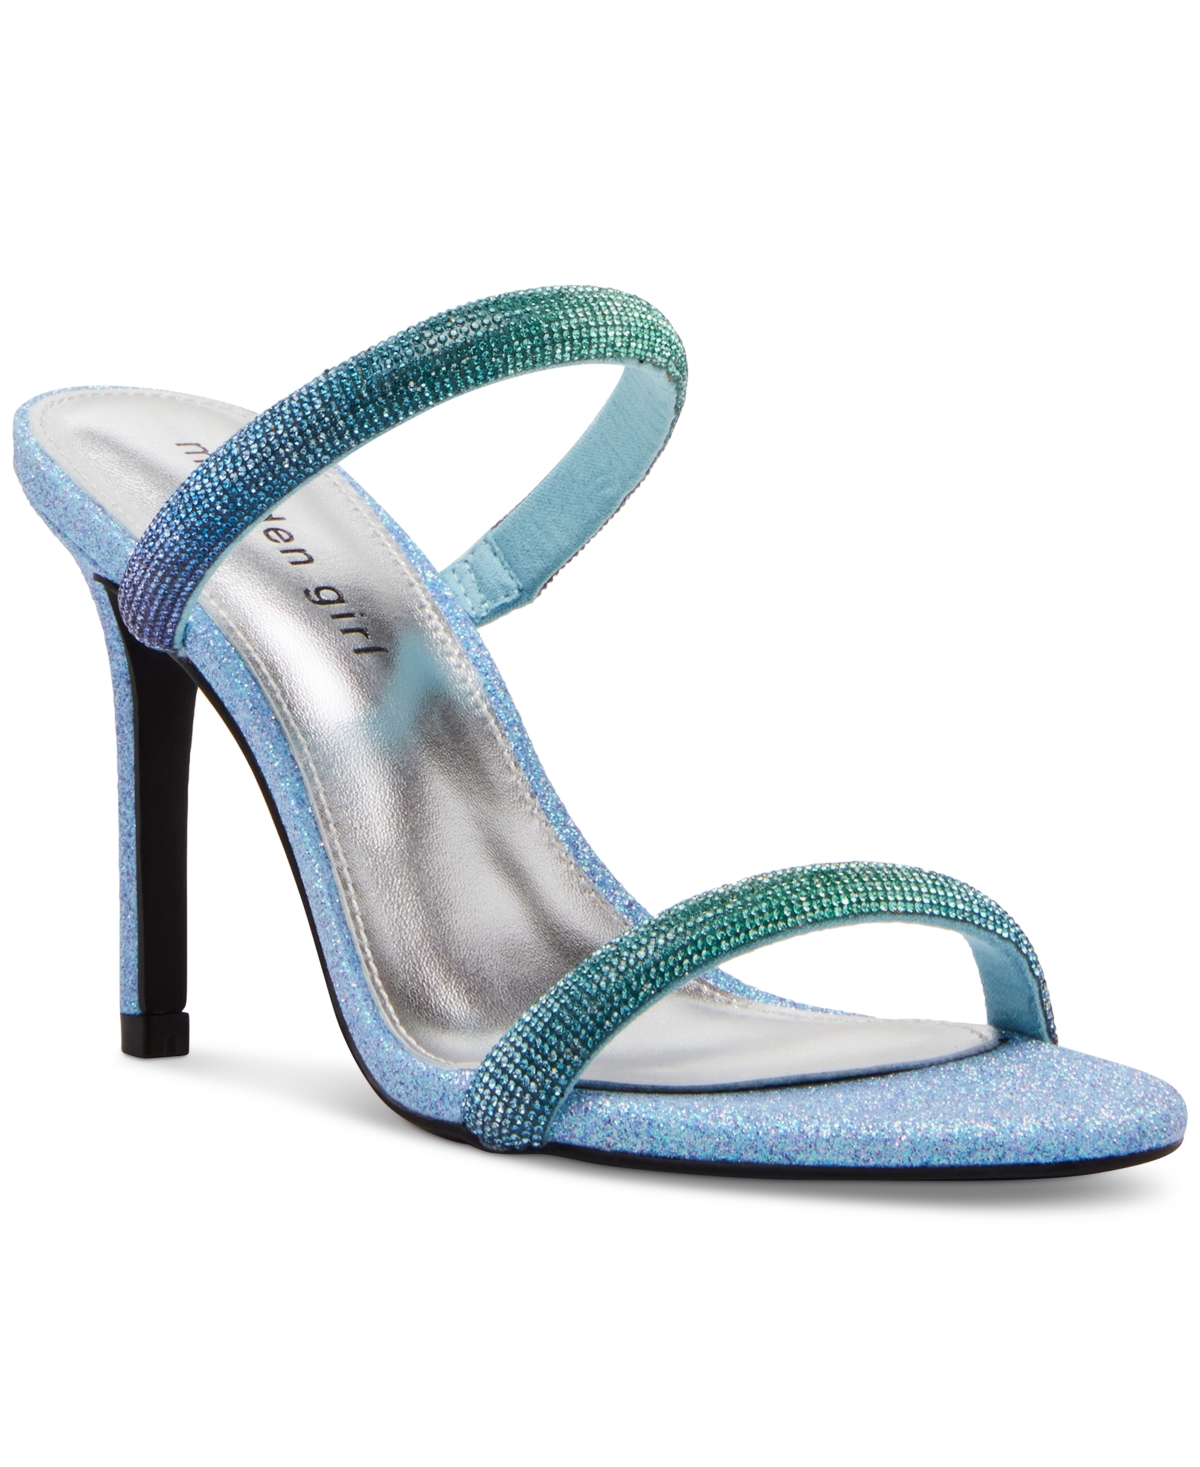 Madden Girl Beauty-r Two Band Stiletto Dress Sandals In Blue Multi